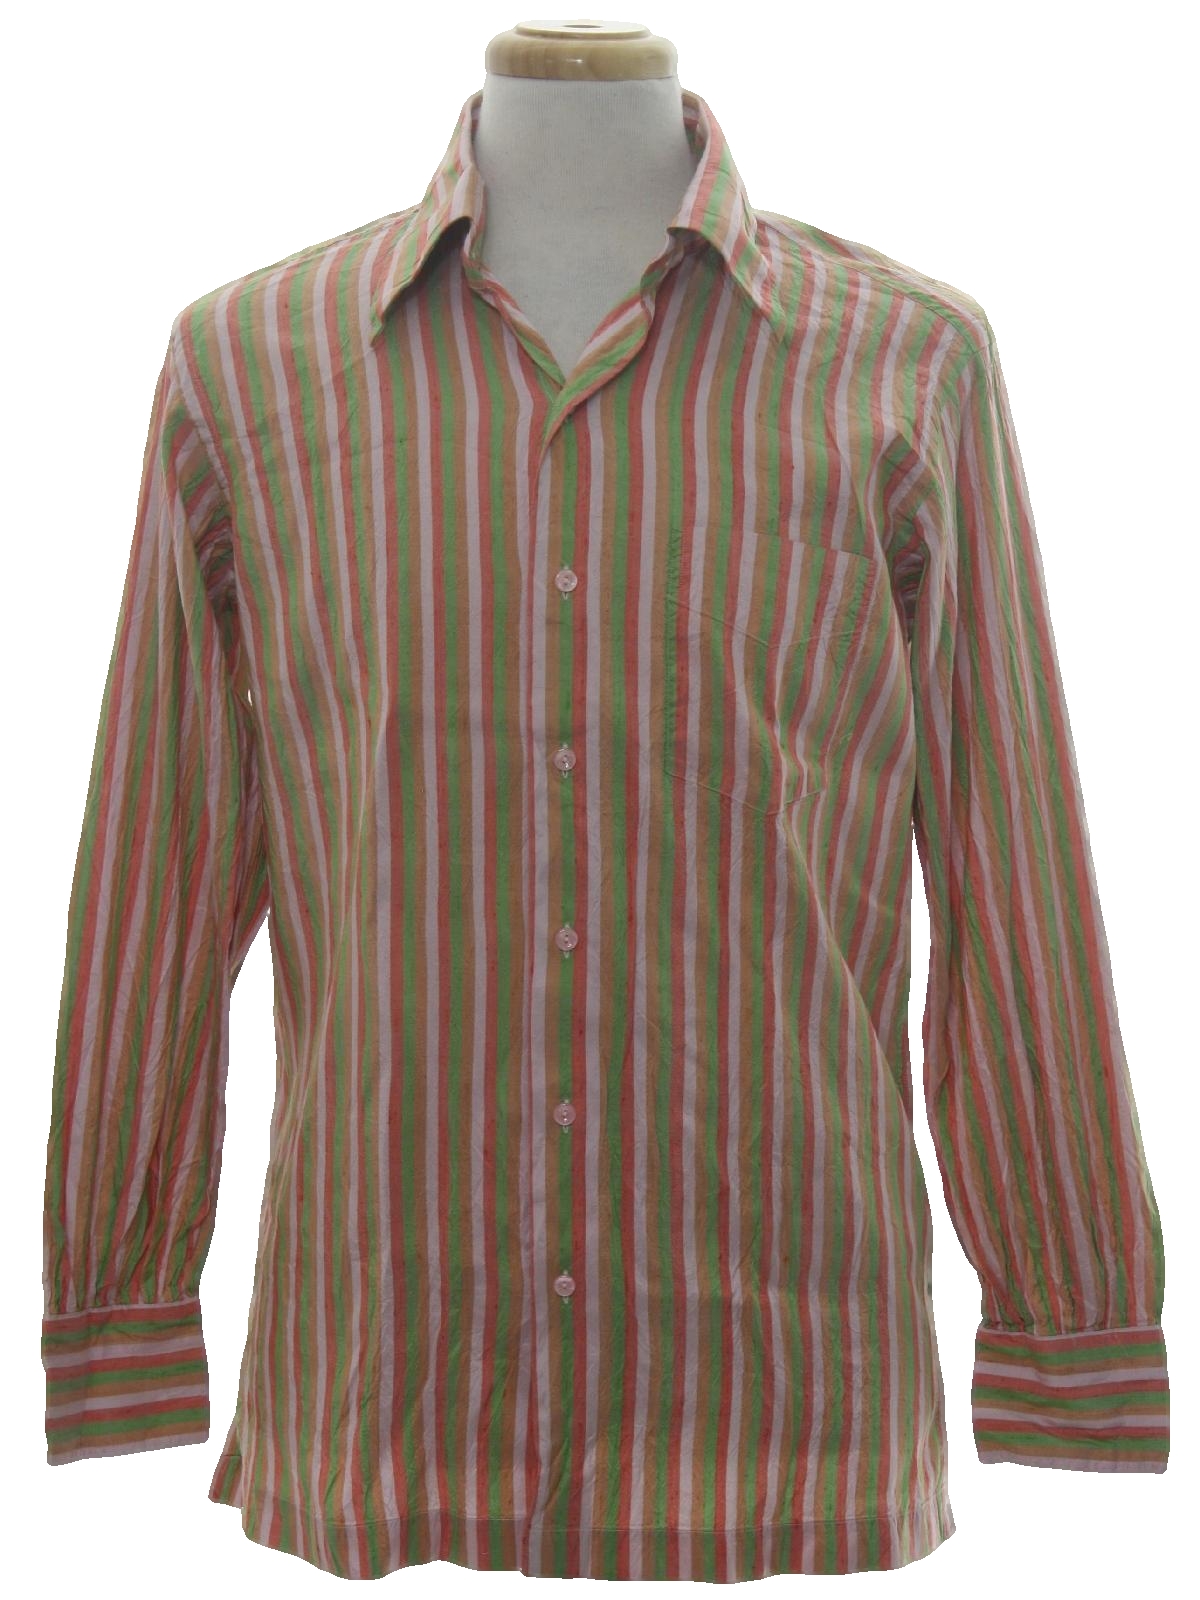 Vintage 1960s Shirt: Late 60s or early 70s -no label- Mens powder pink ...